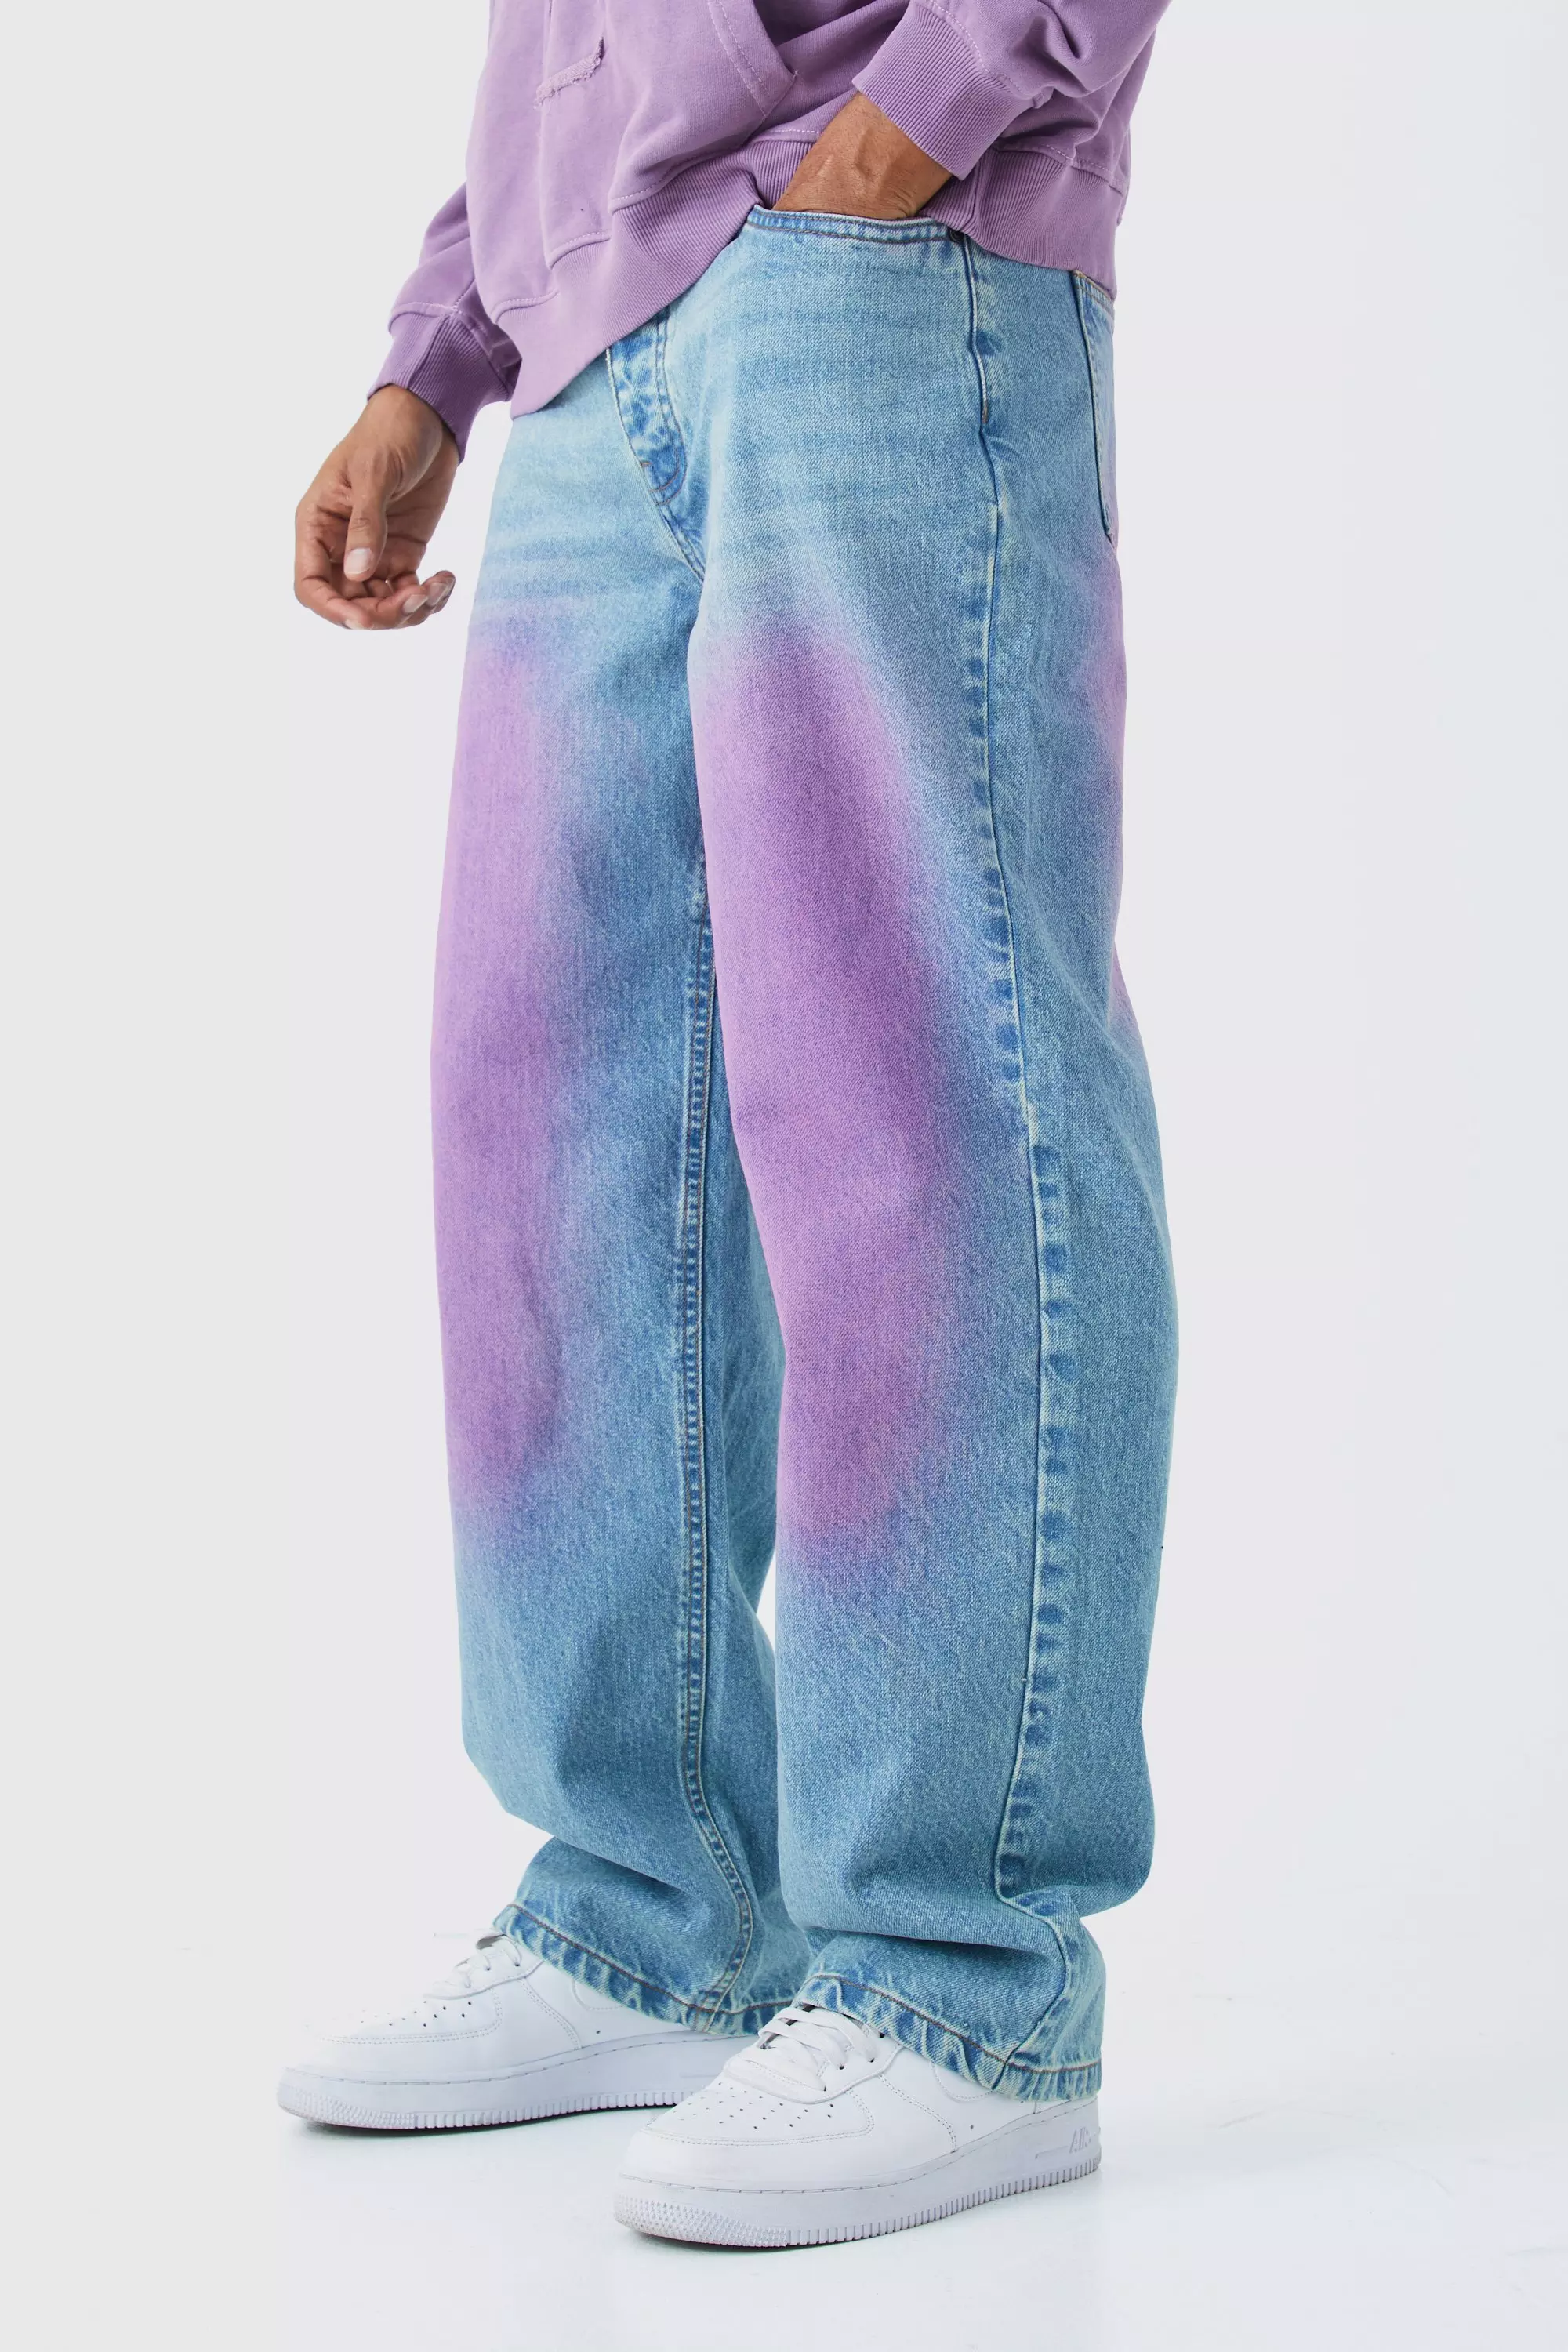 INFLATION Mens Pink Wide Leg High Street Washed Denim Pants Unisex Baggy  Baggy Trousers Mens In Plus Size 230827 From Cong04, $39.16